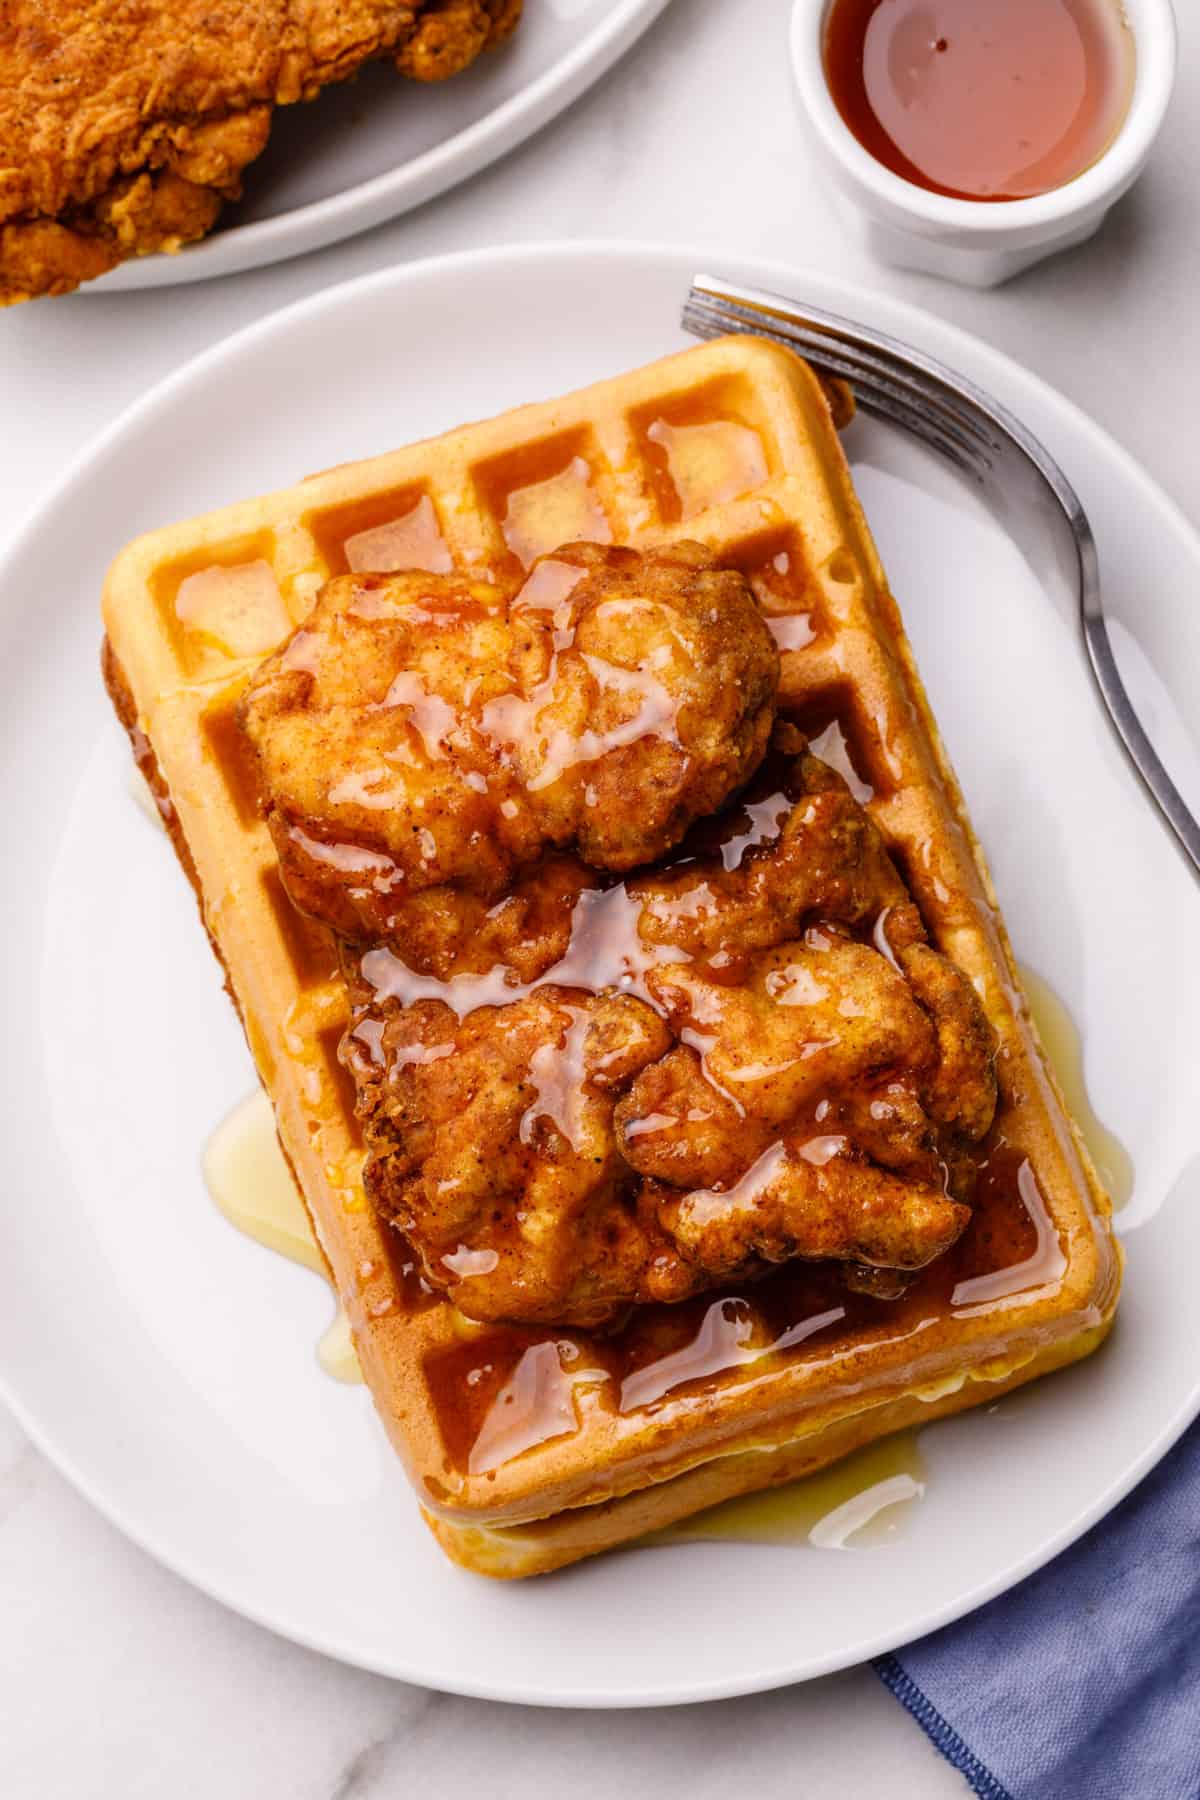 top down view of chicken and waffles with syrup served on a white round plate with a silver fork